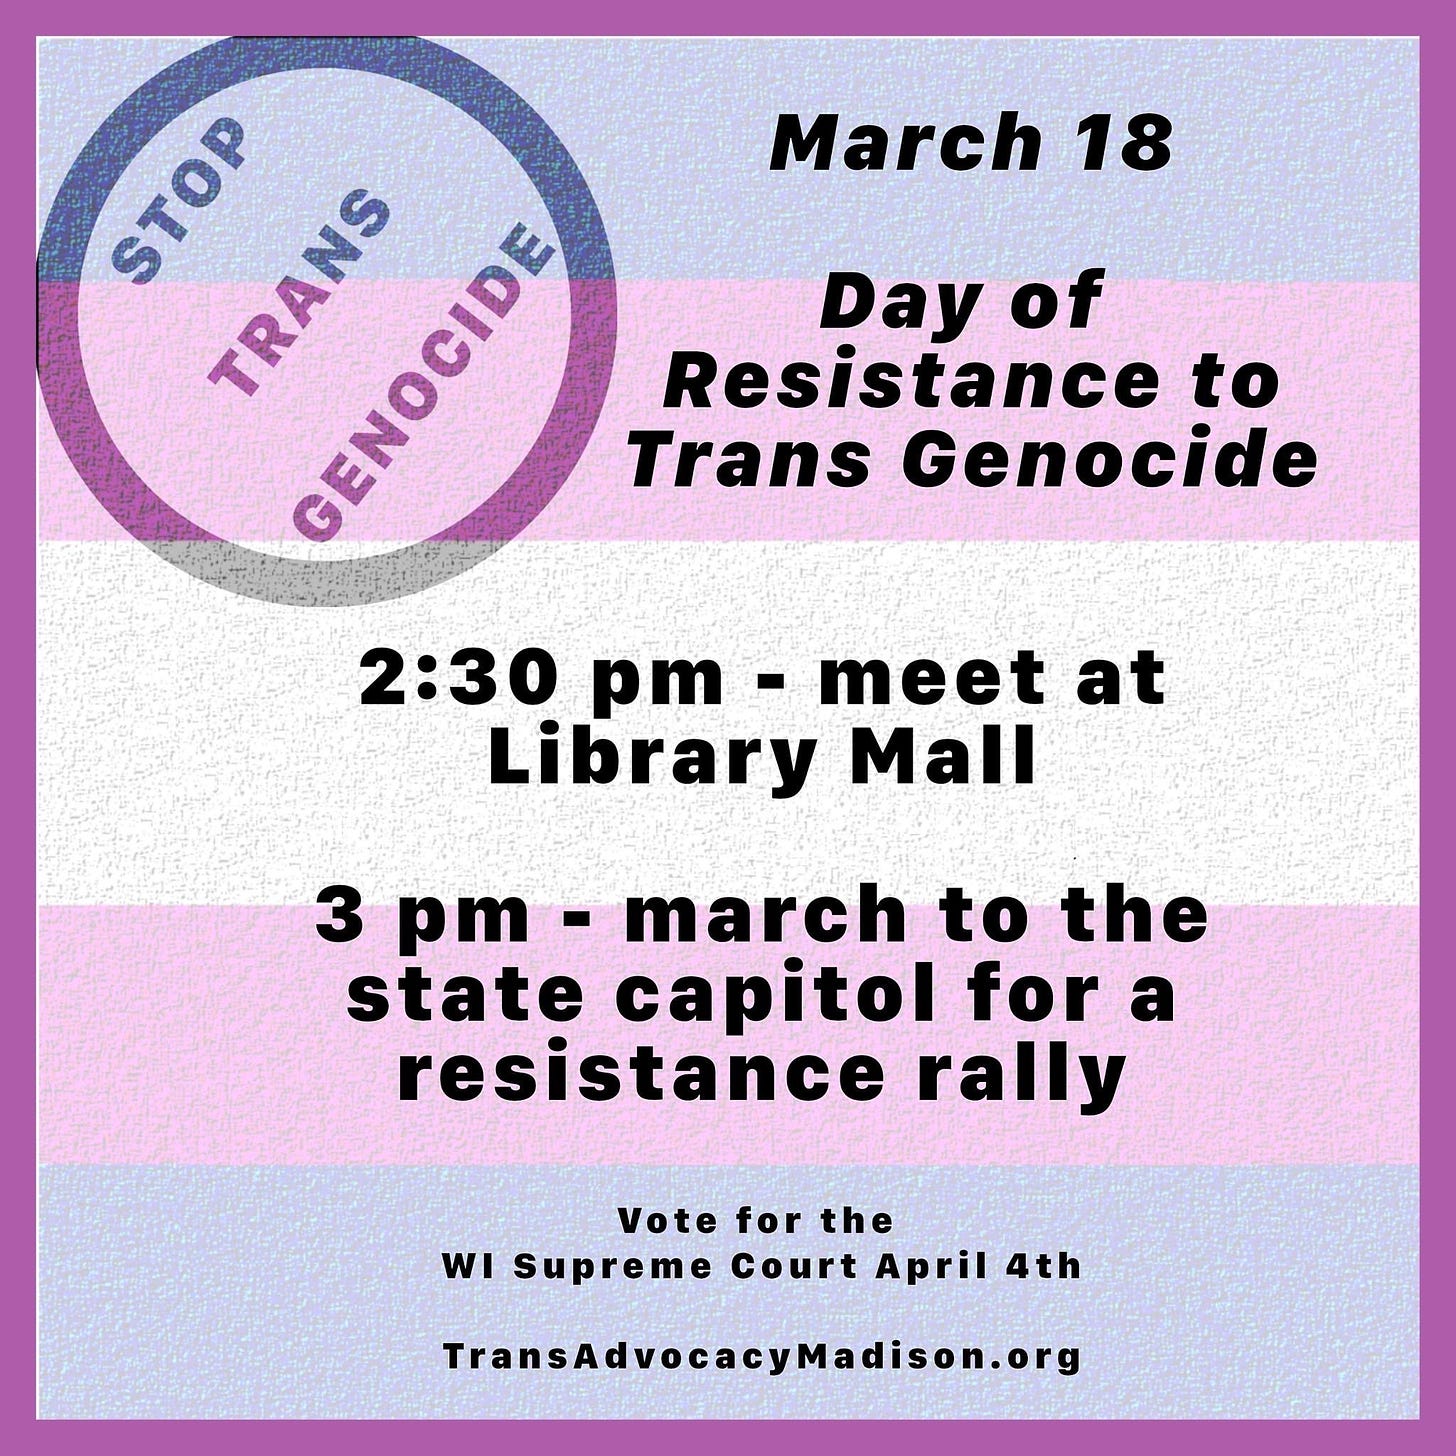 Graphic promoting the Day of Resistance to Trans Genocide